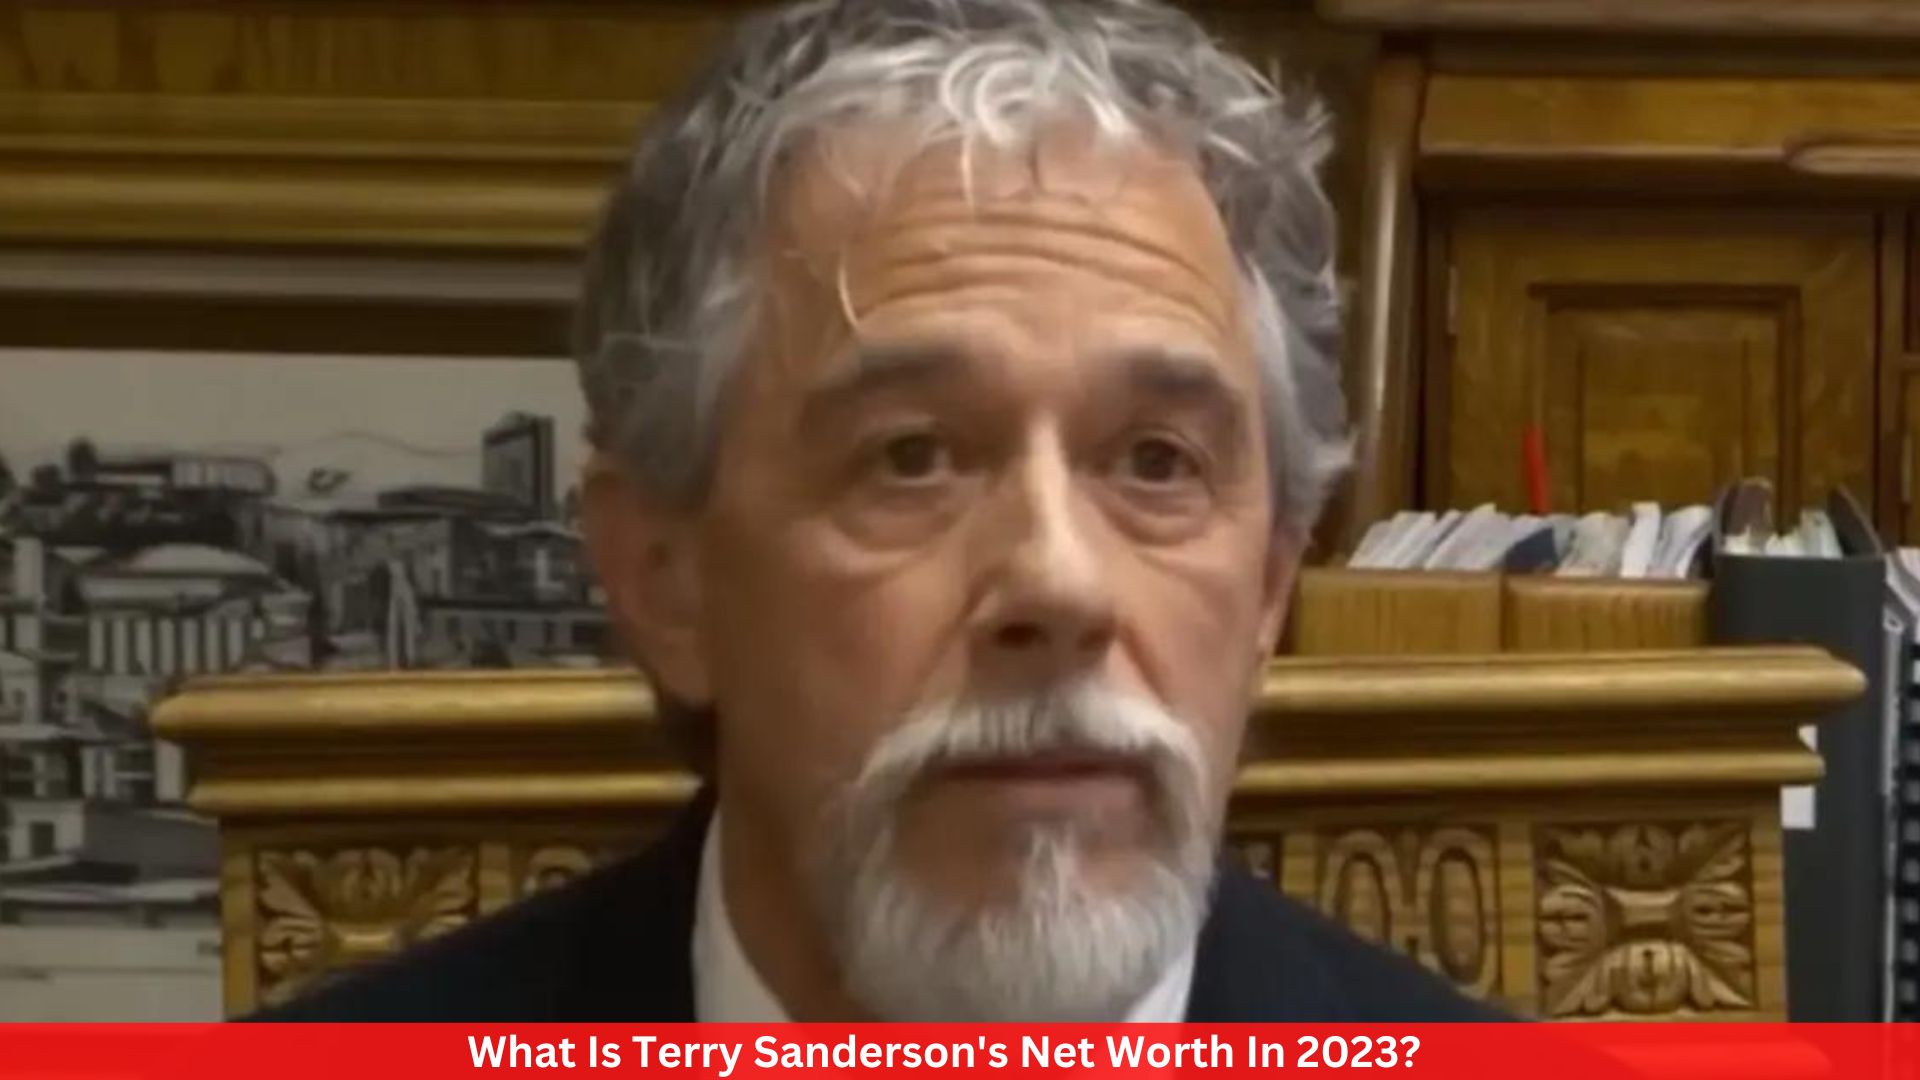 What Is Terry Sanderson's Net Worth In 2023?